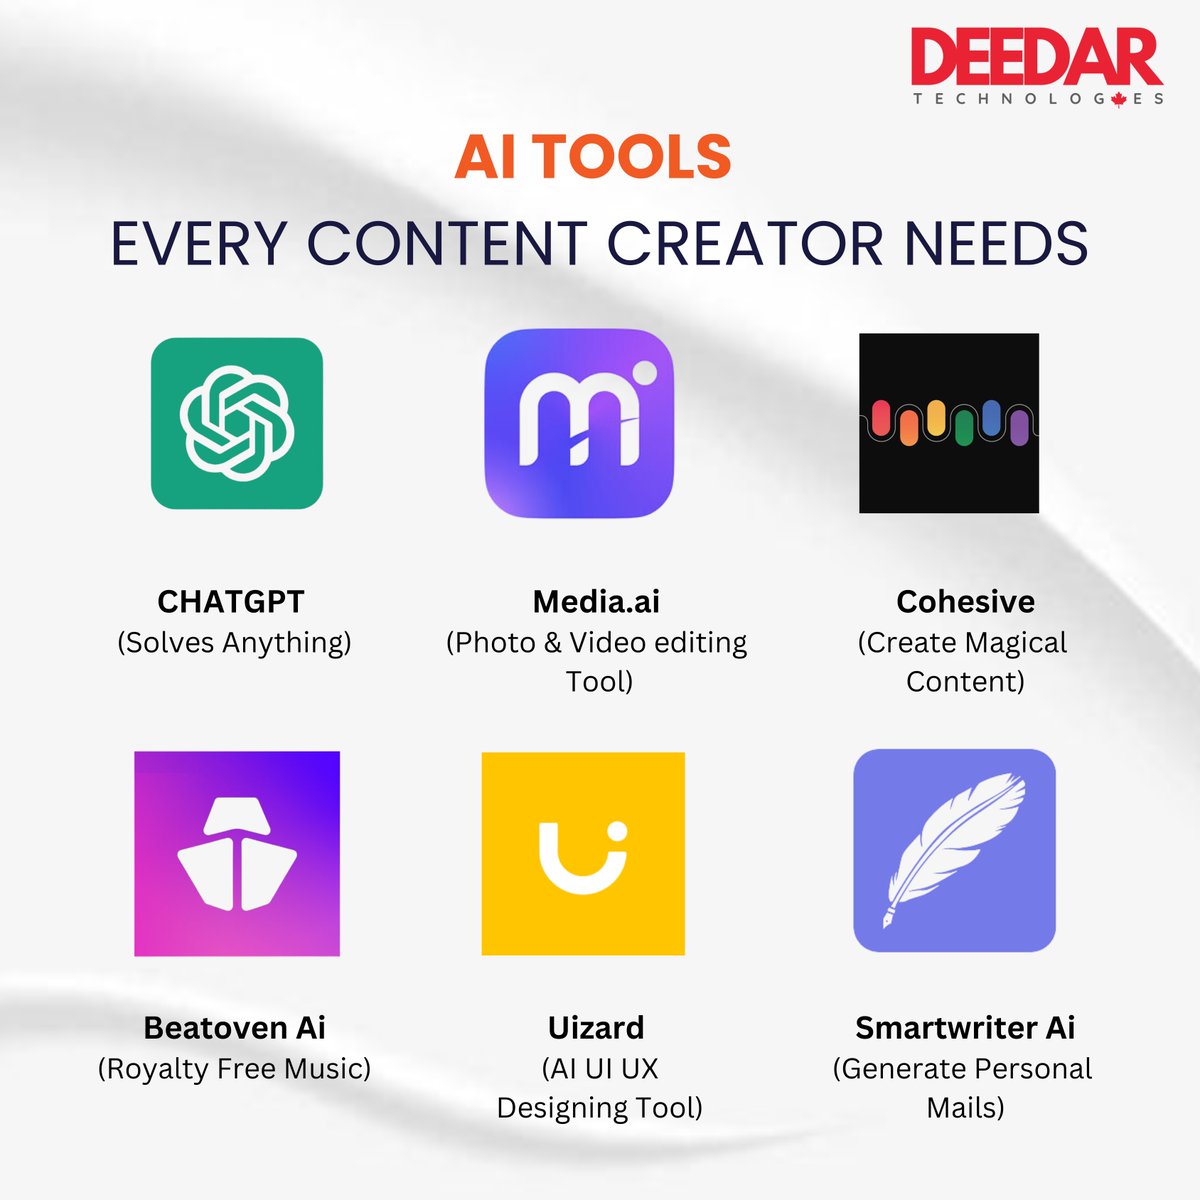 Unlock your content creation potential with essential AI tools: ChatGPT for conversation, Media.ai for media enhancement, Cohesive for collaboration, Beatoven AI for music, Uizard for design, and SmartWriter AI for writing.

#DeedarTechnologies #DigitalMarketing